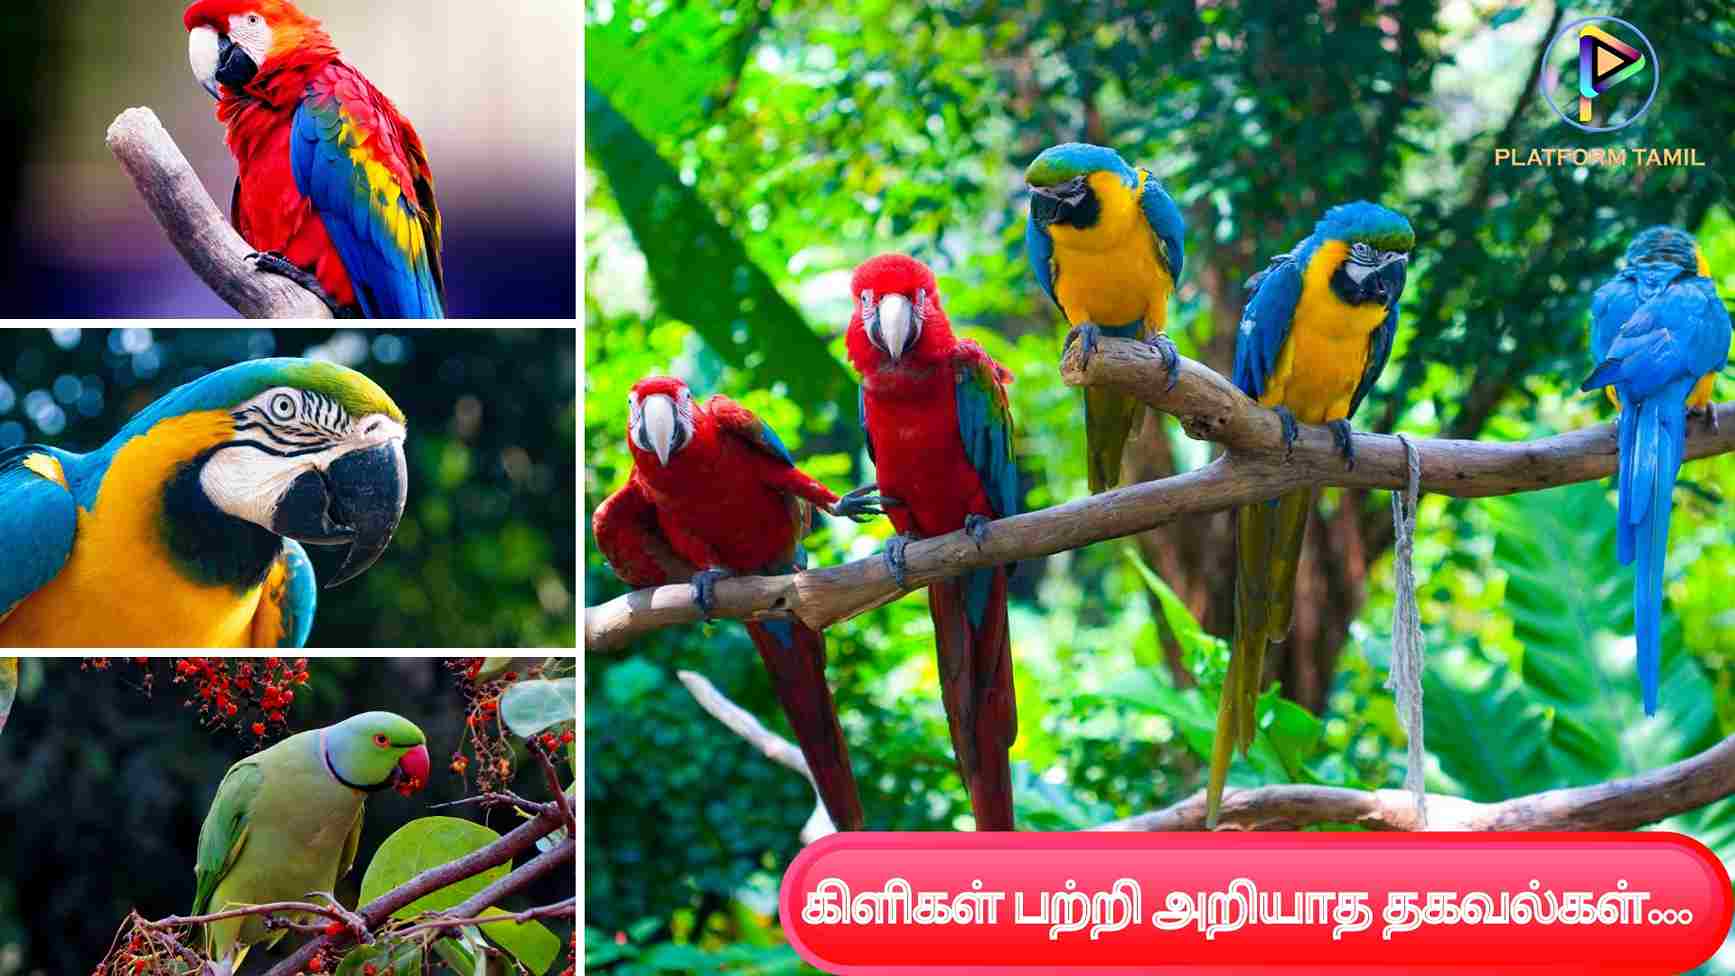 Facts About Parrot in Tamil - Platform Tamil